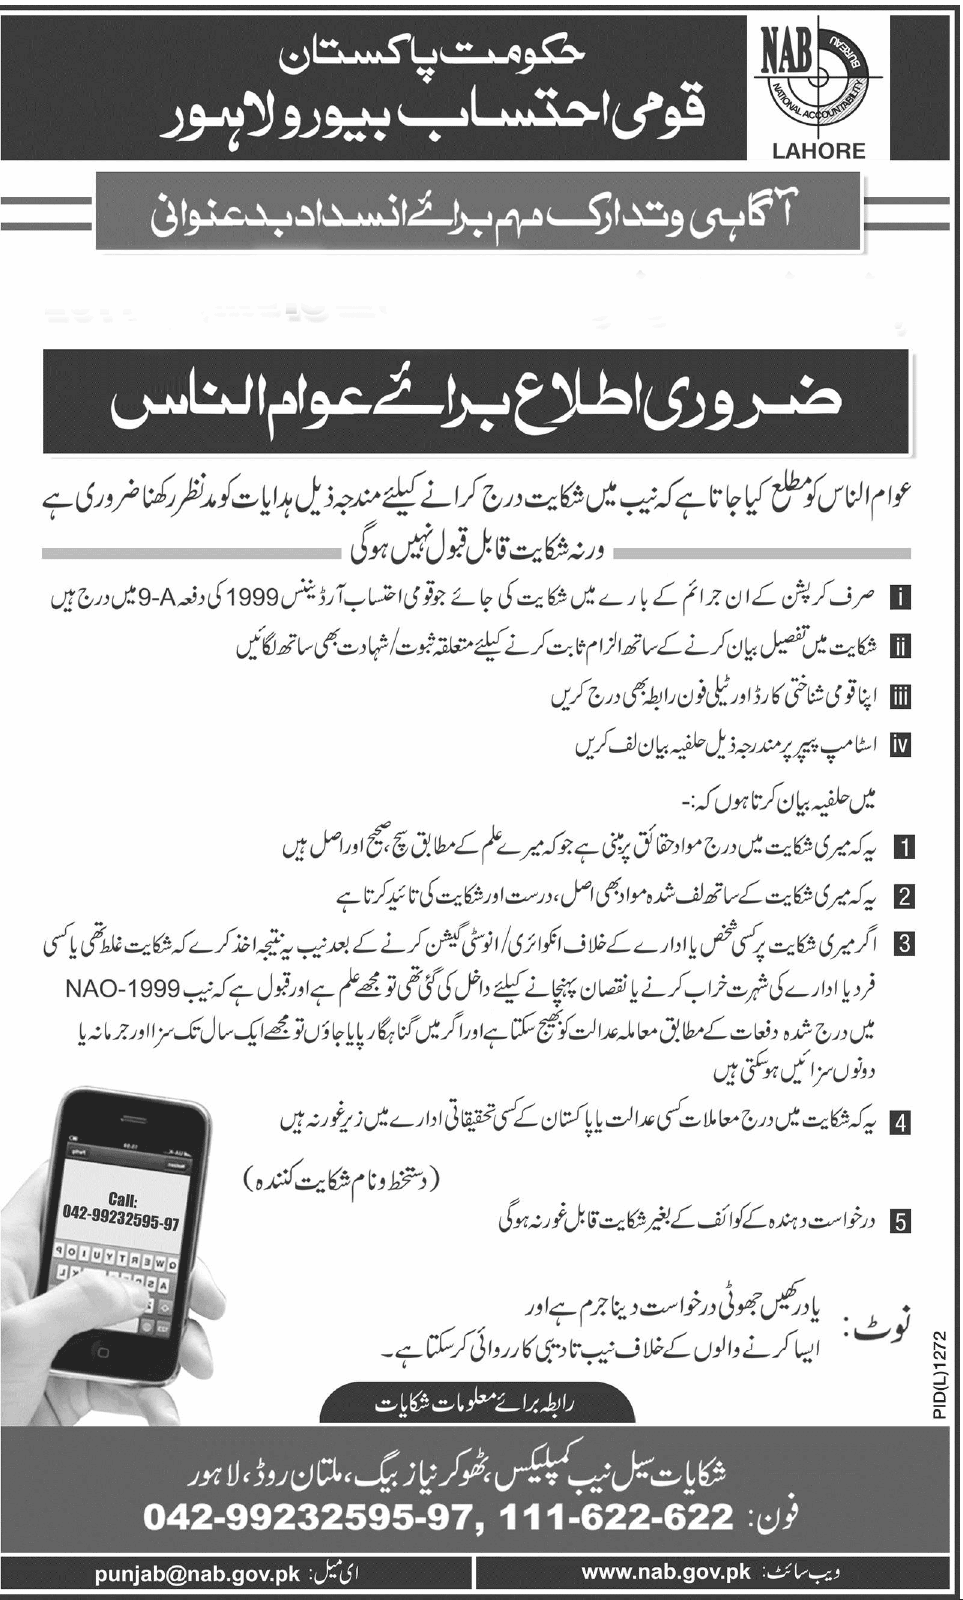 How to Lodge Complaint in NAB? Step By Step Procedure (Urdu-English)